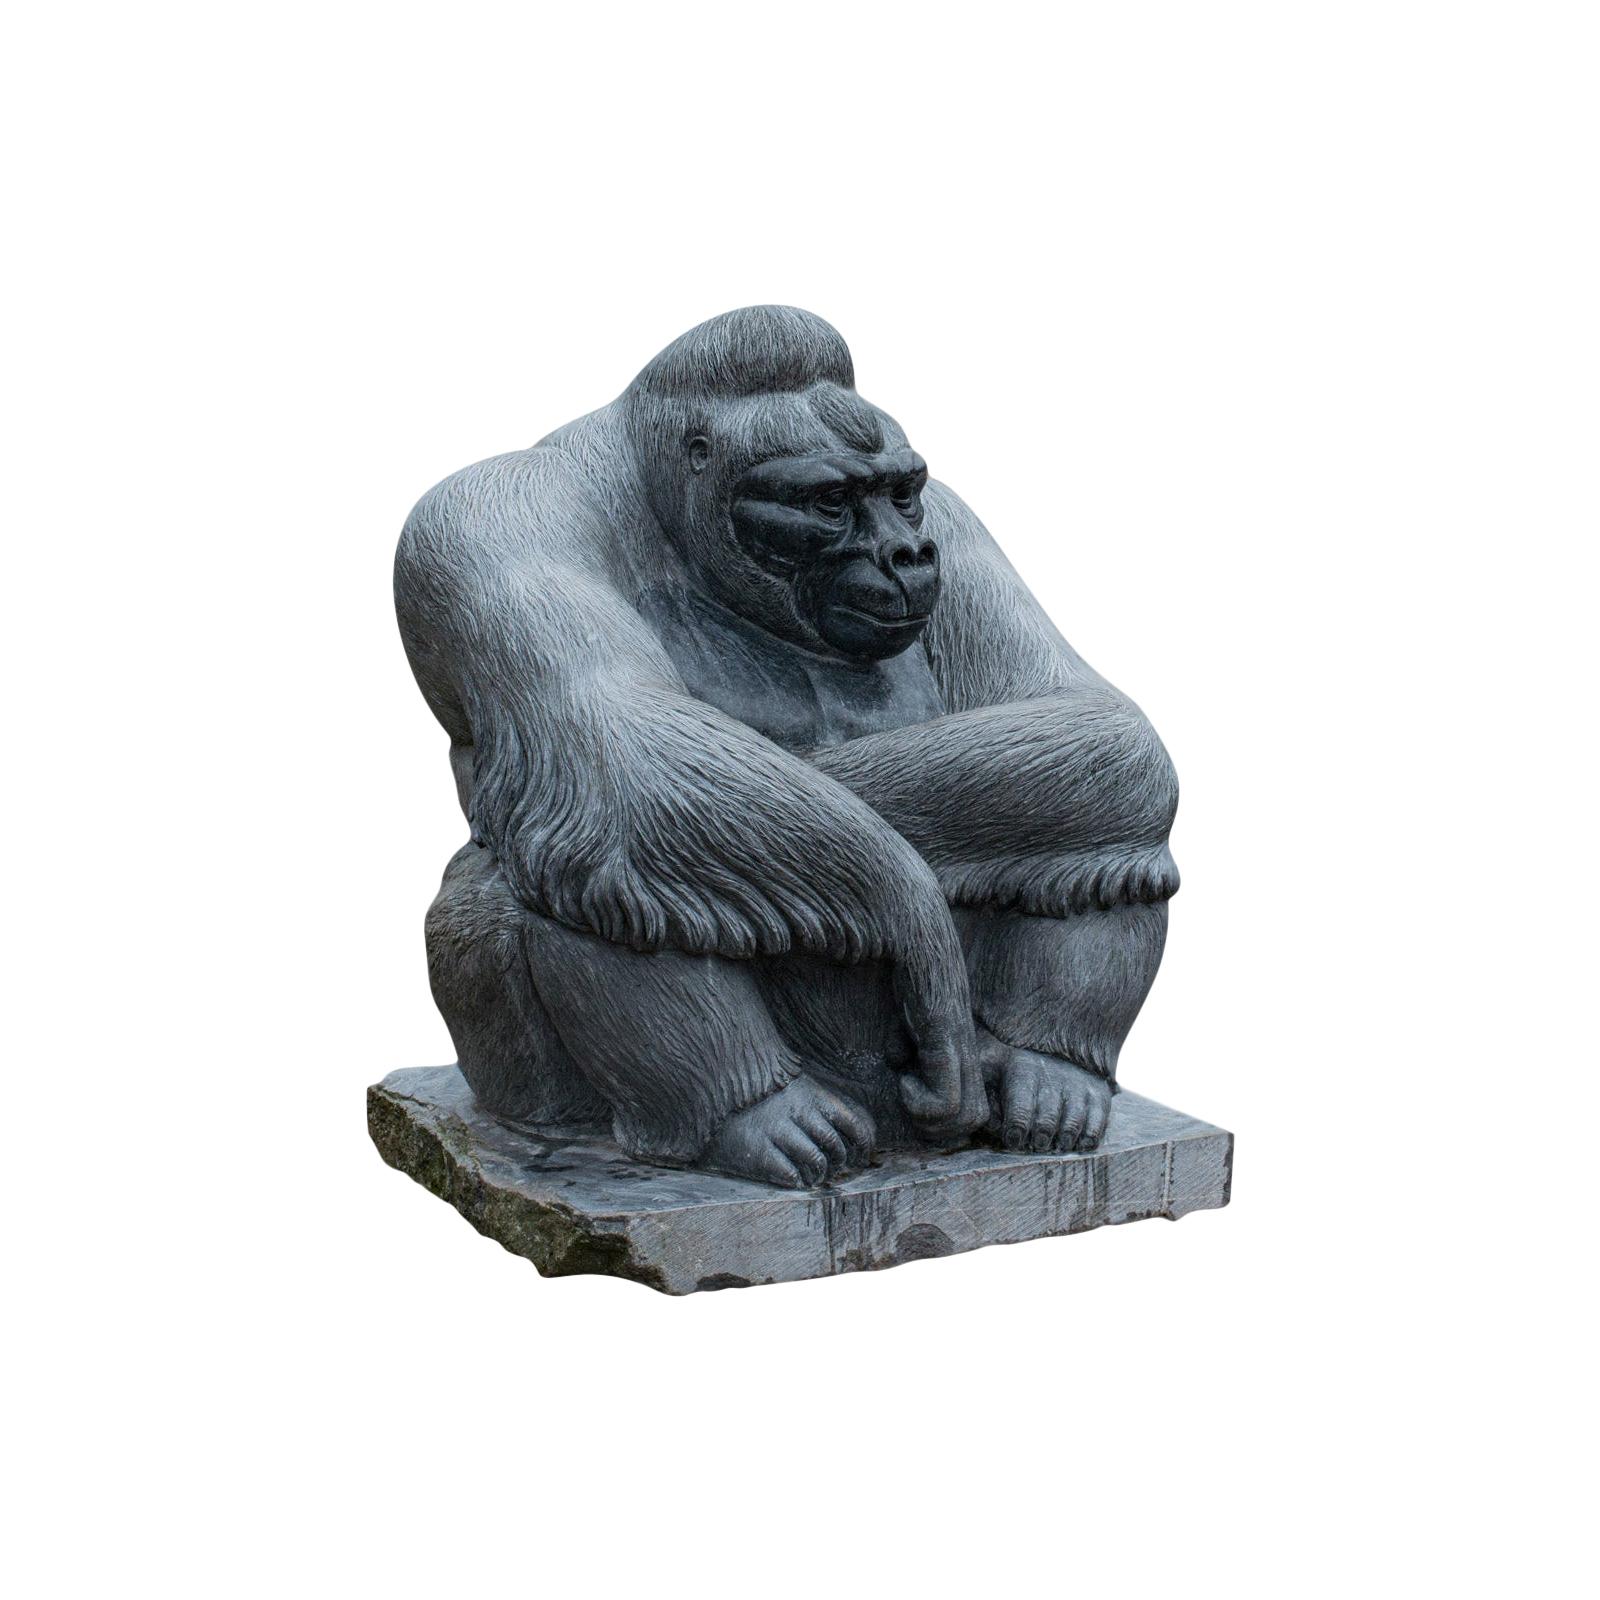 Large Sculptural Artwork Marble Statue Shabani Lowland Gorilla by Dominic Hurley For Sale